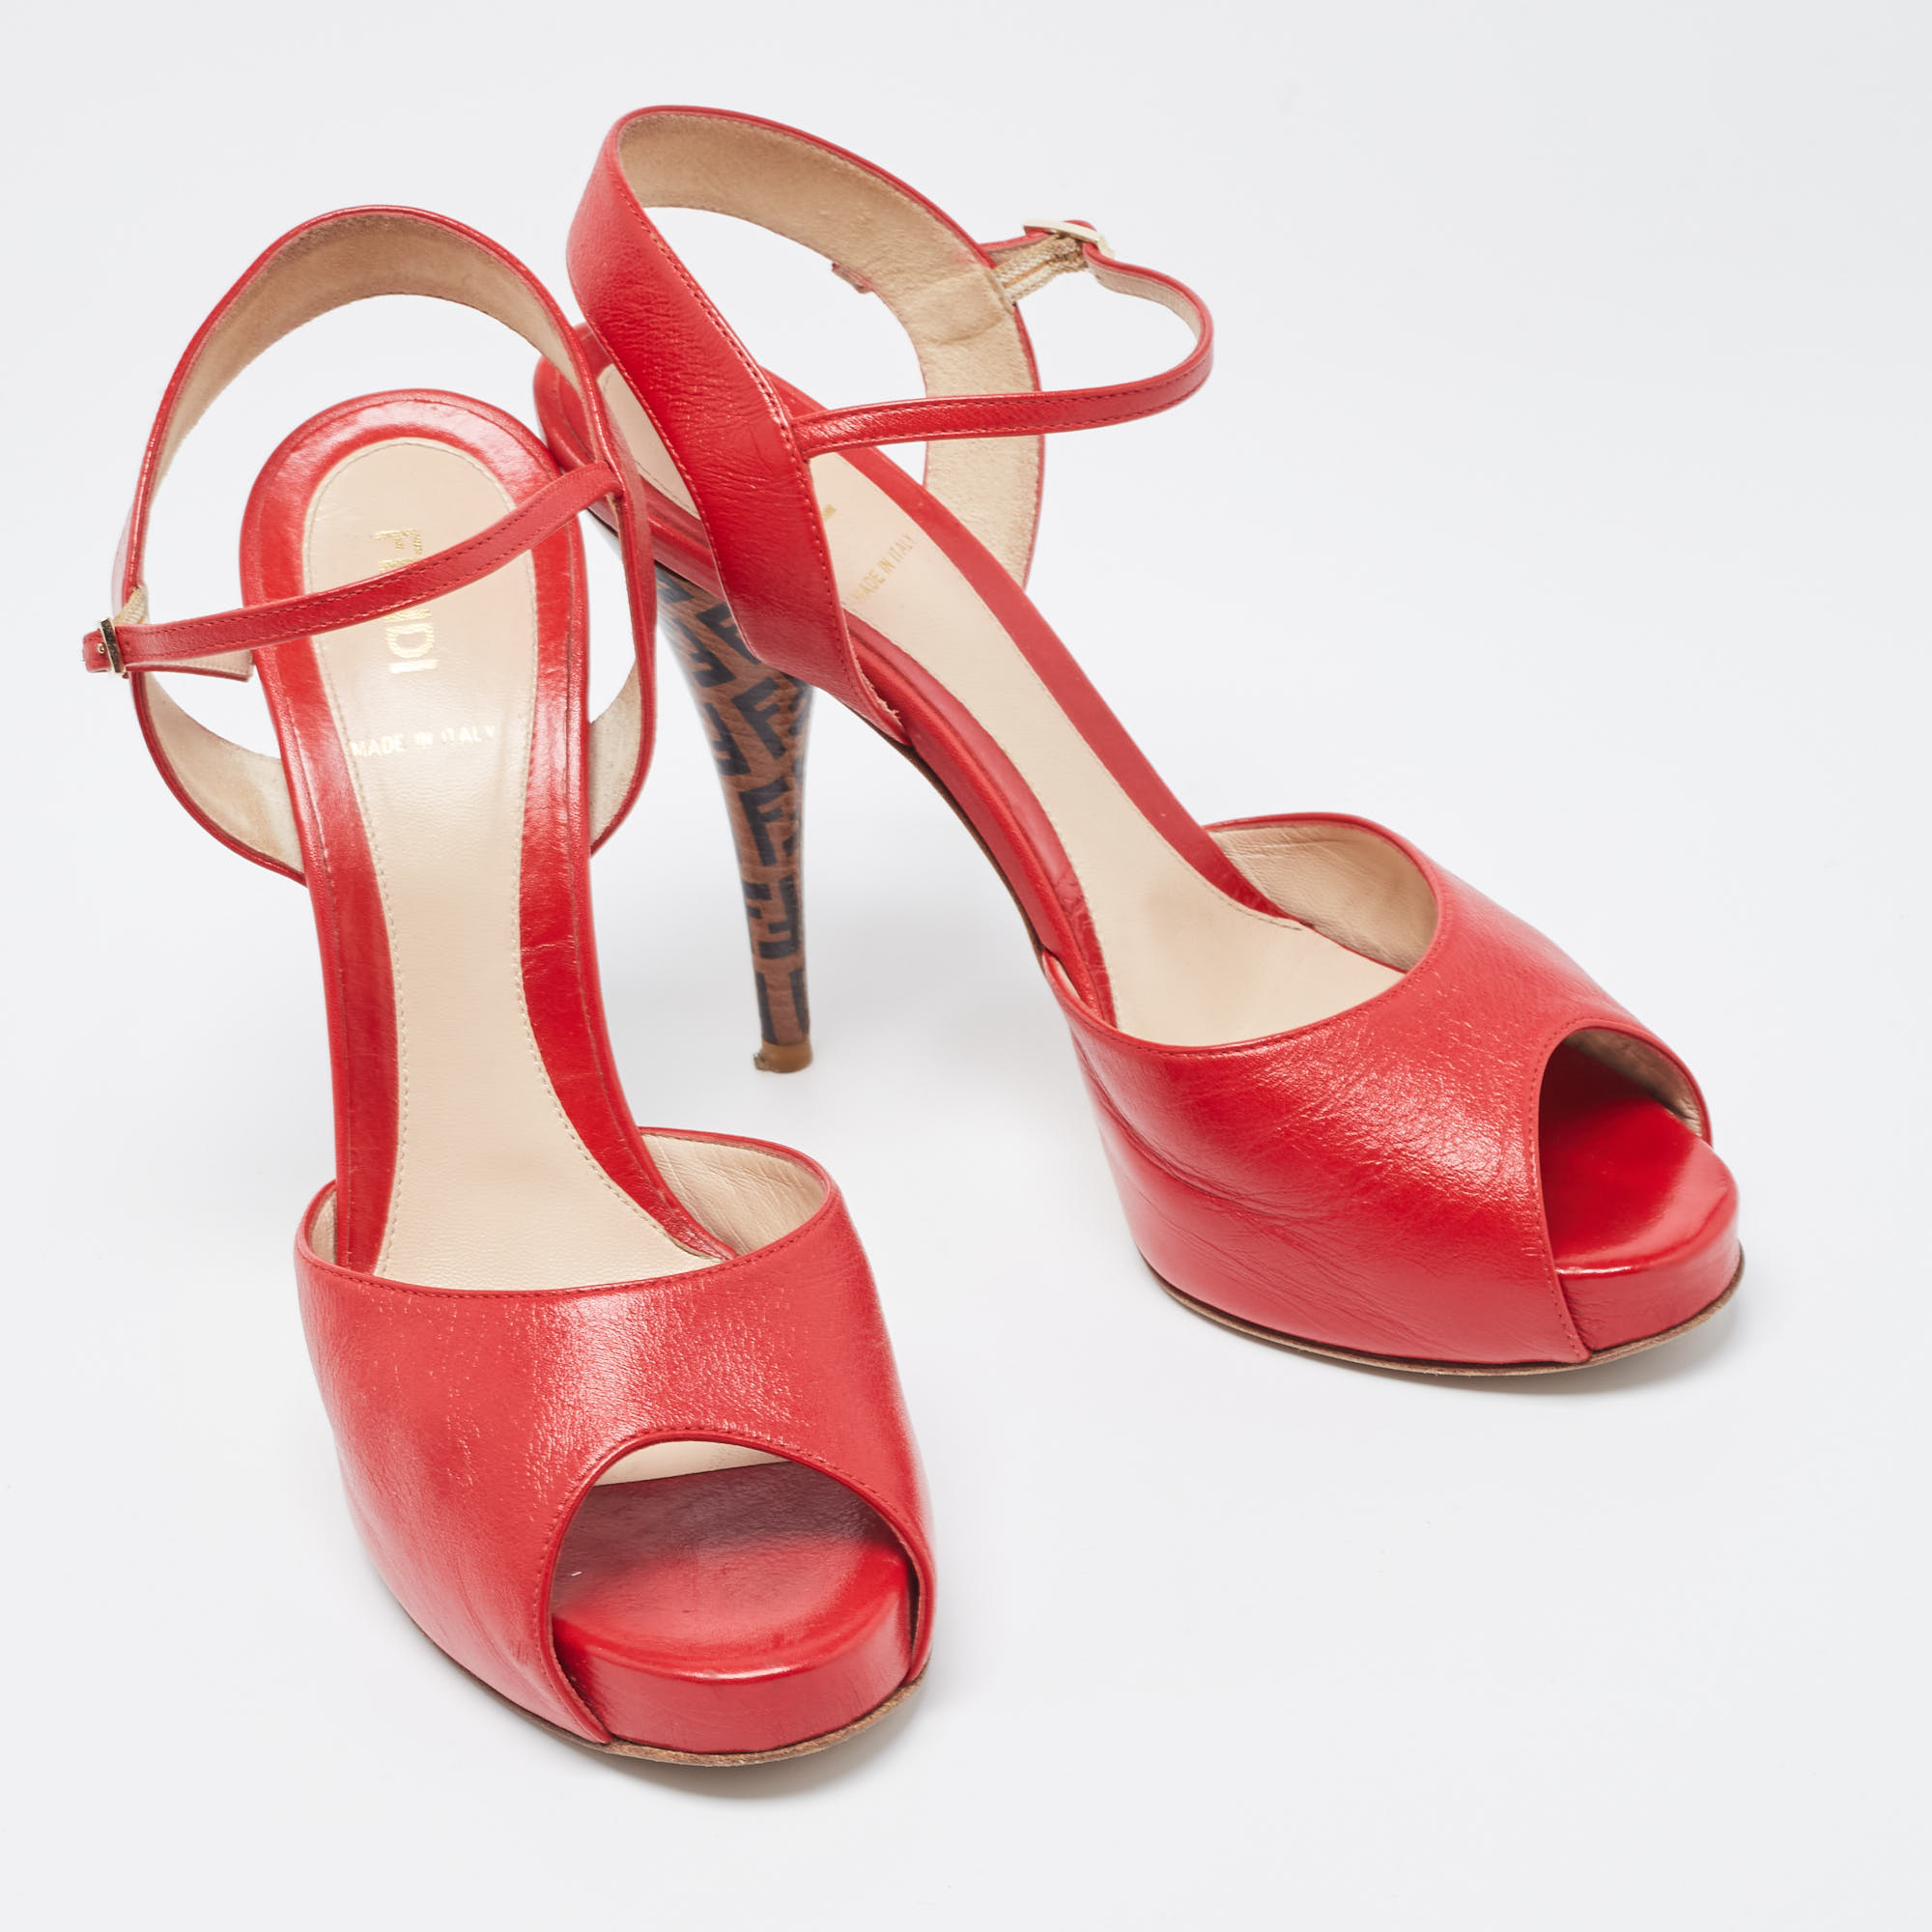 Fendi Red Leather  Open Toe Ankle Strap Sandals Size 39